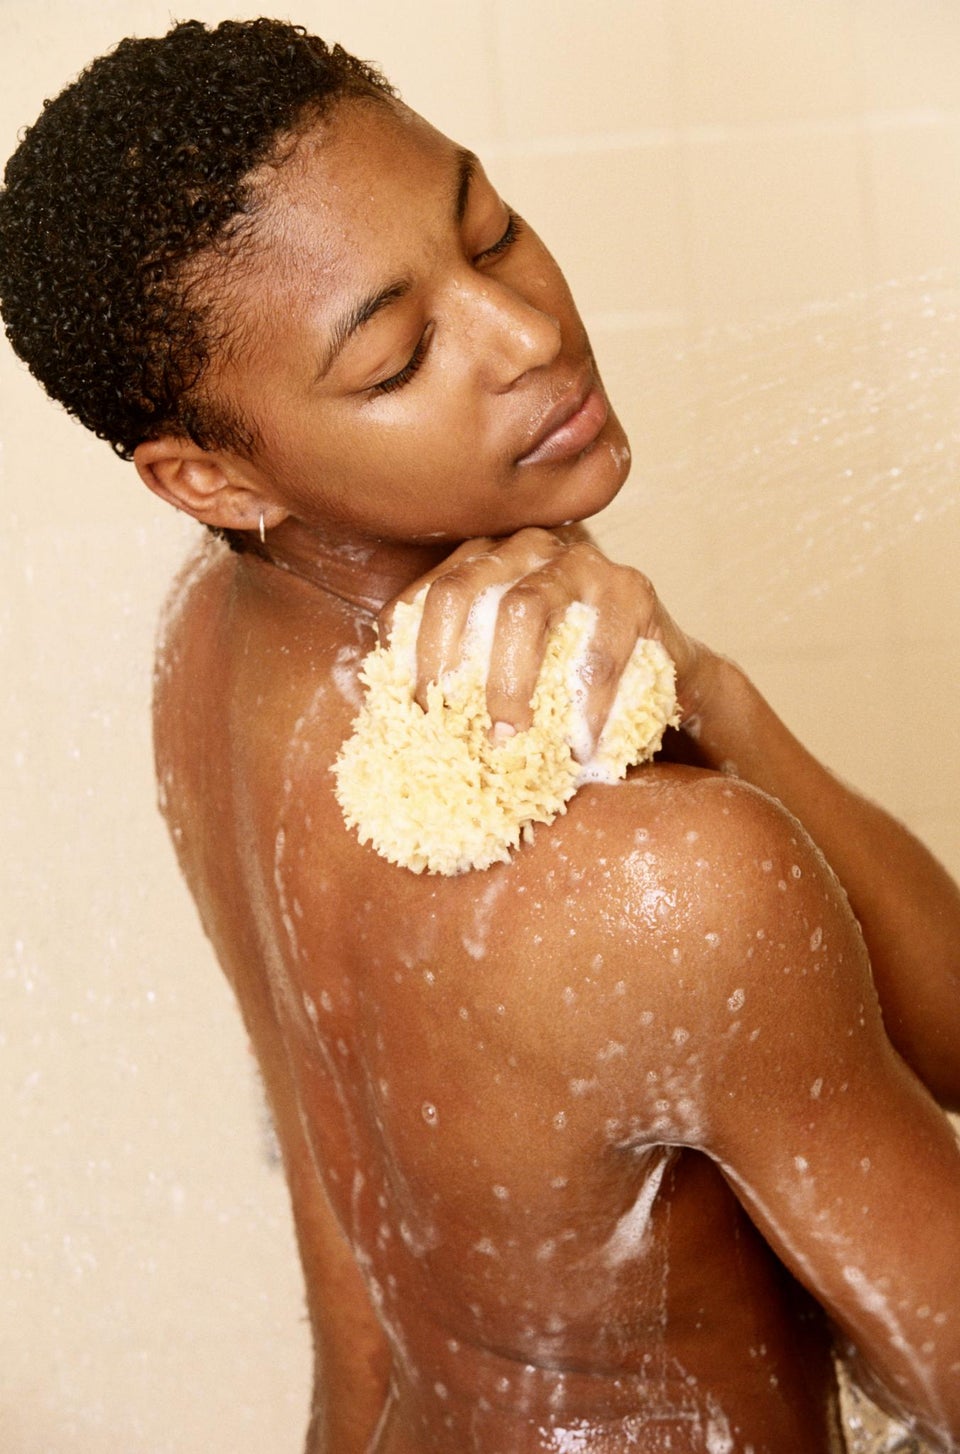 You Don’t Have to Shower Every Day, Dermatologists Say